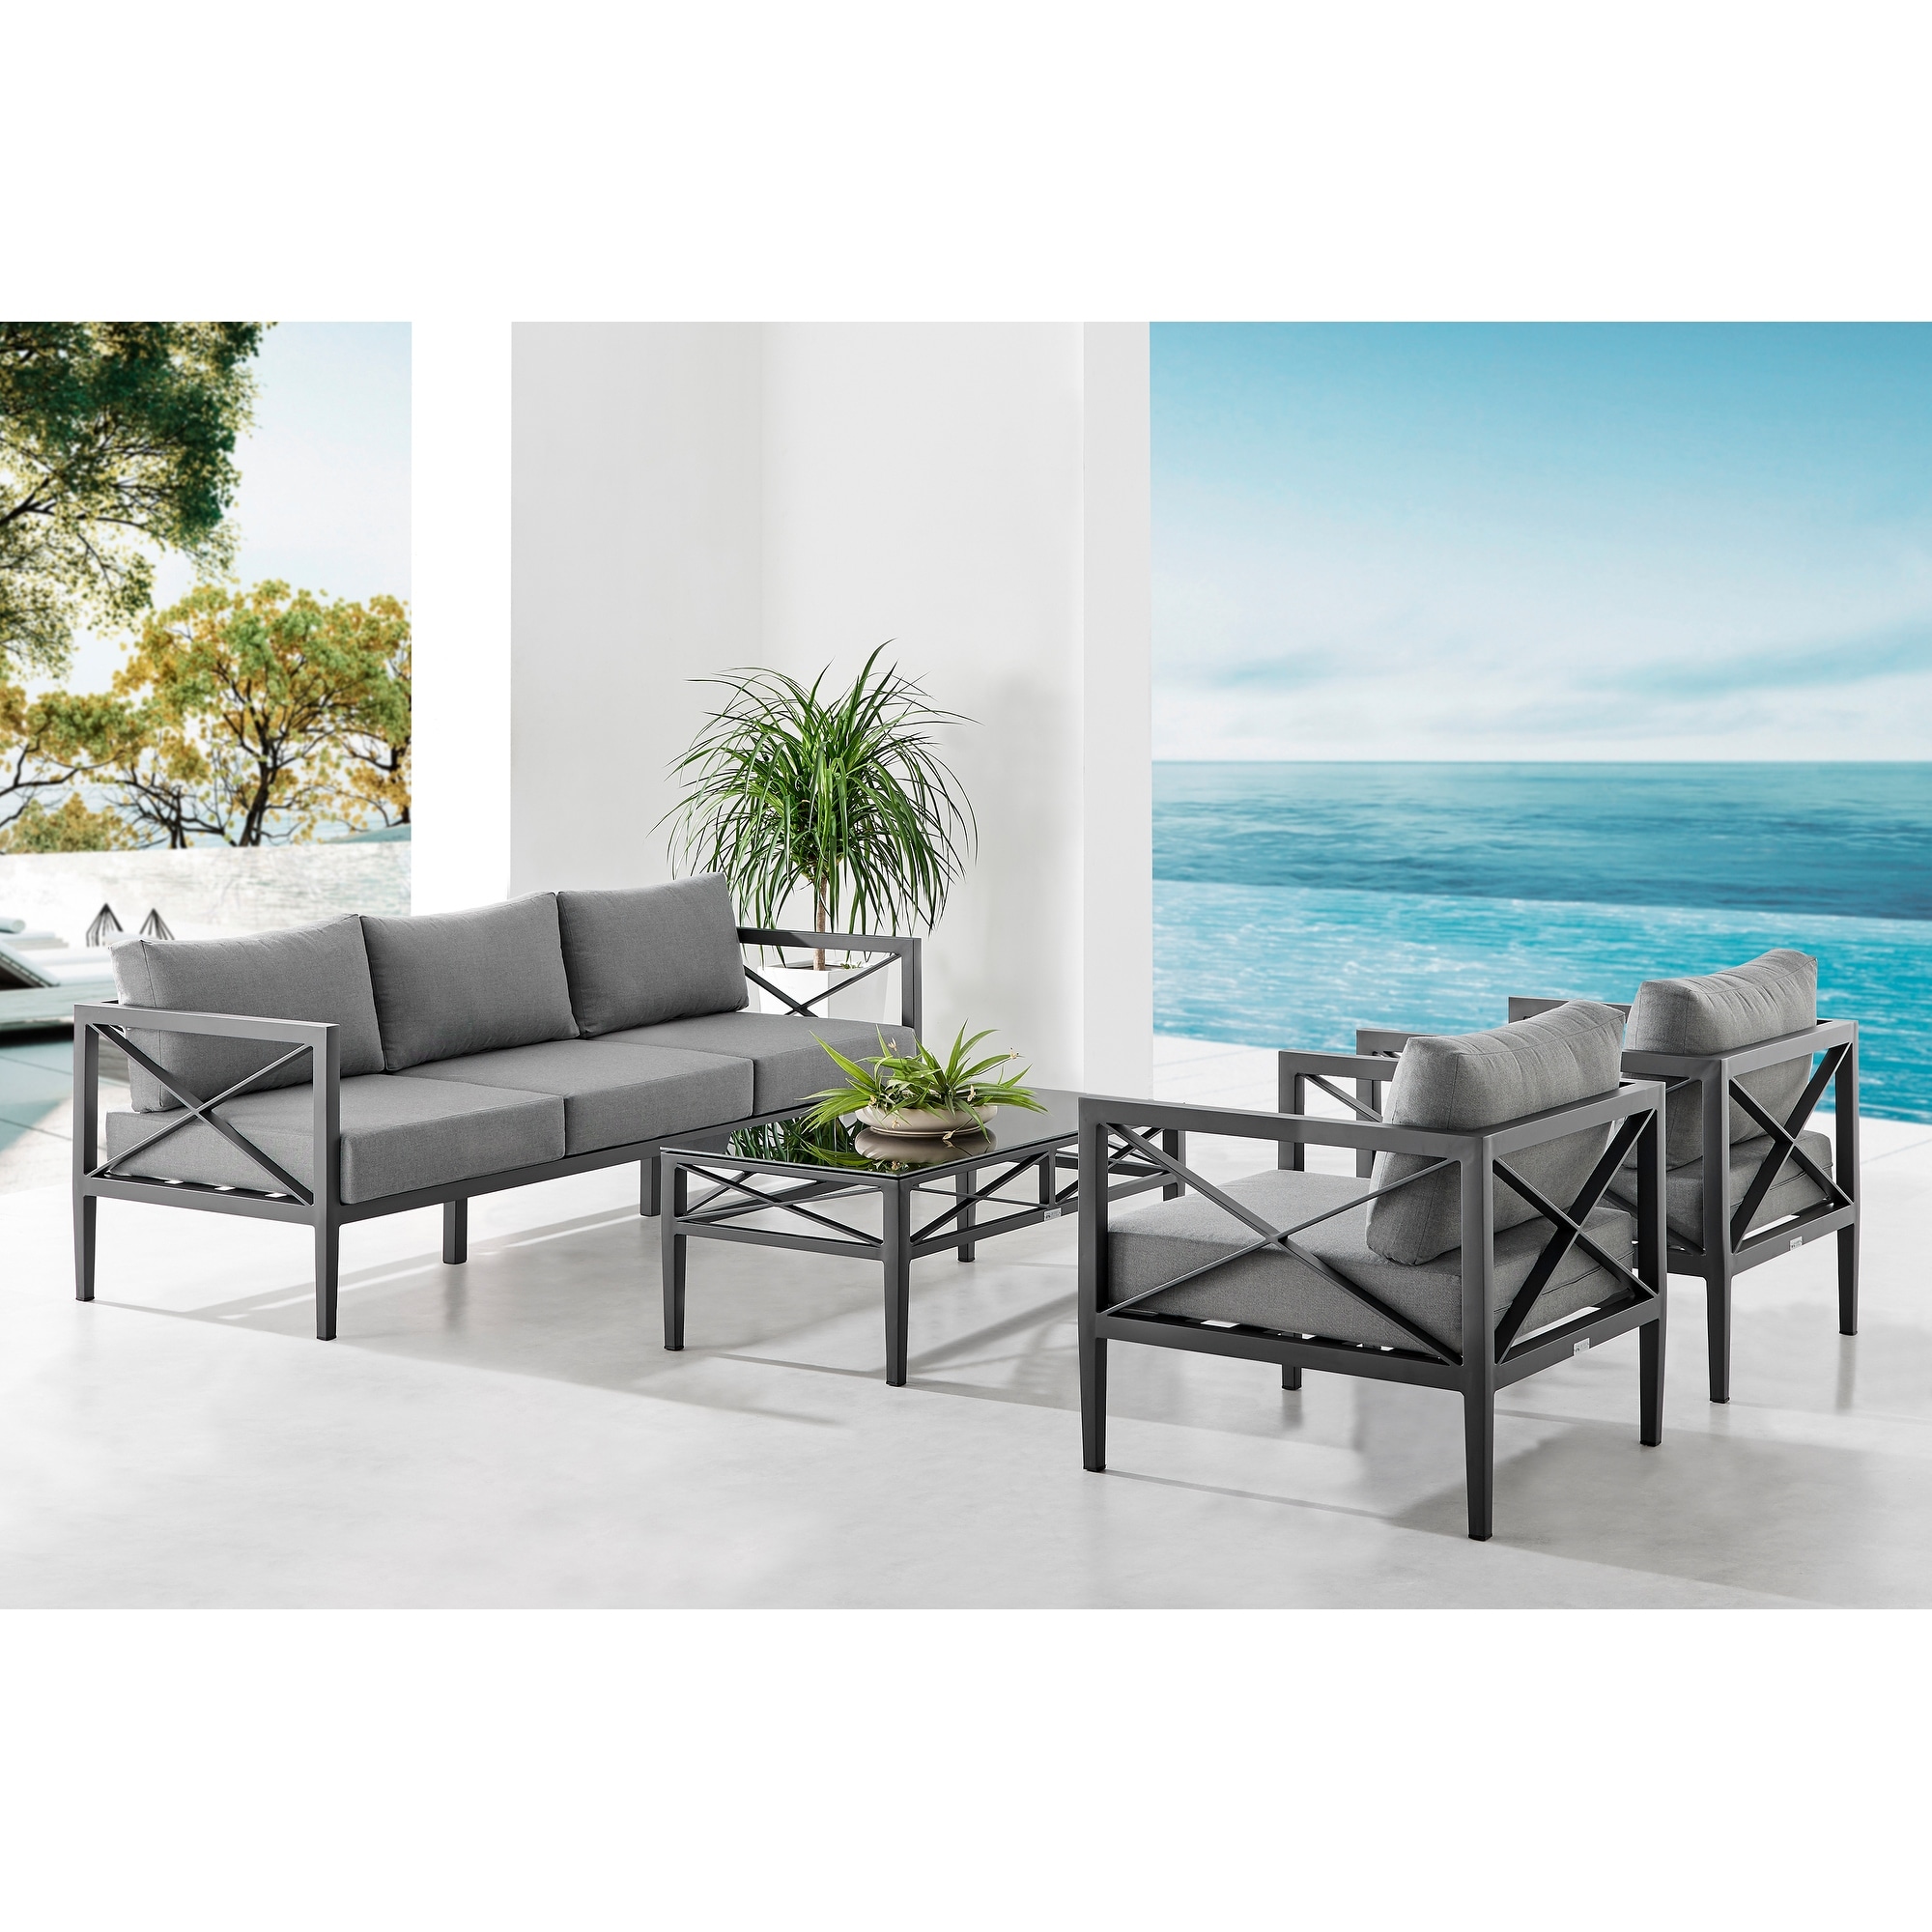 Sonoma Outdoor 4-piece Patio Chat Set